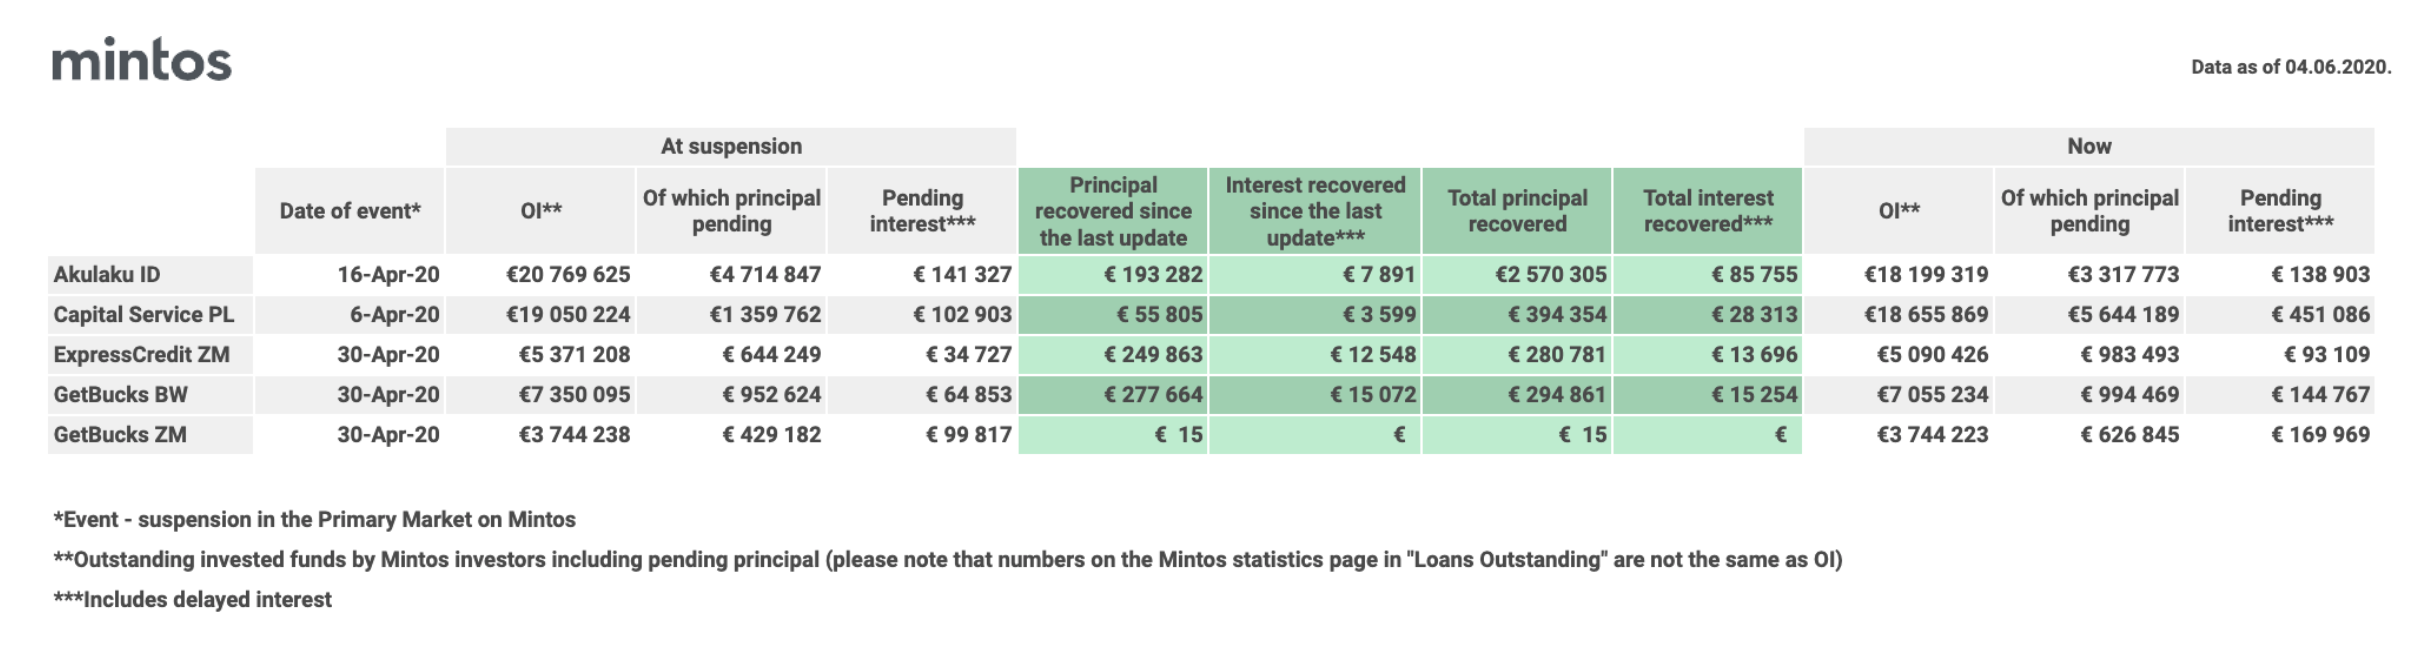 5 June Status Update On The Suspended Lending Companies Mintos Blog